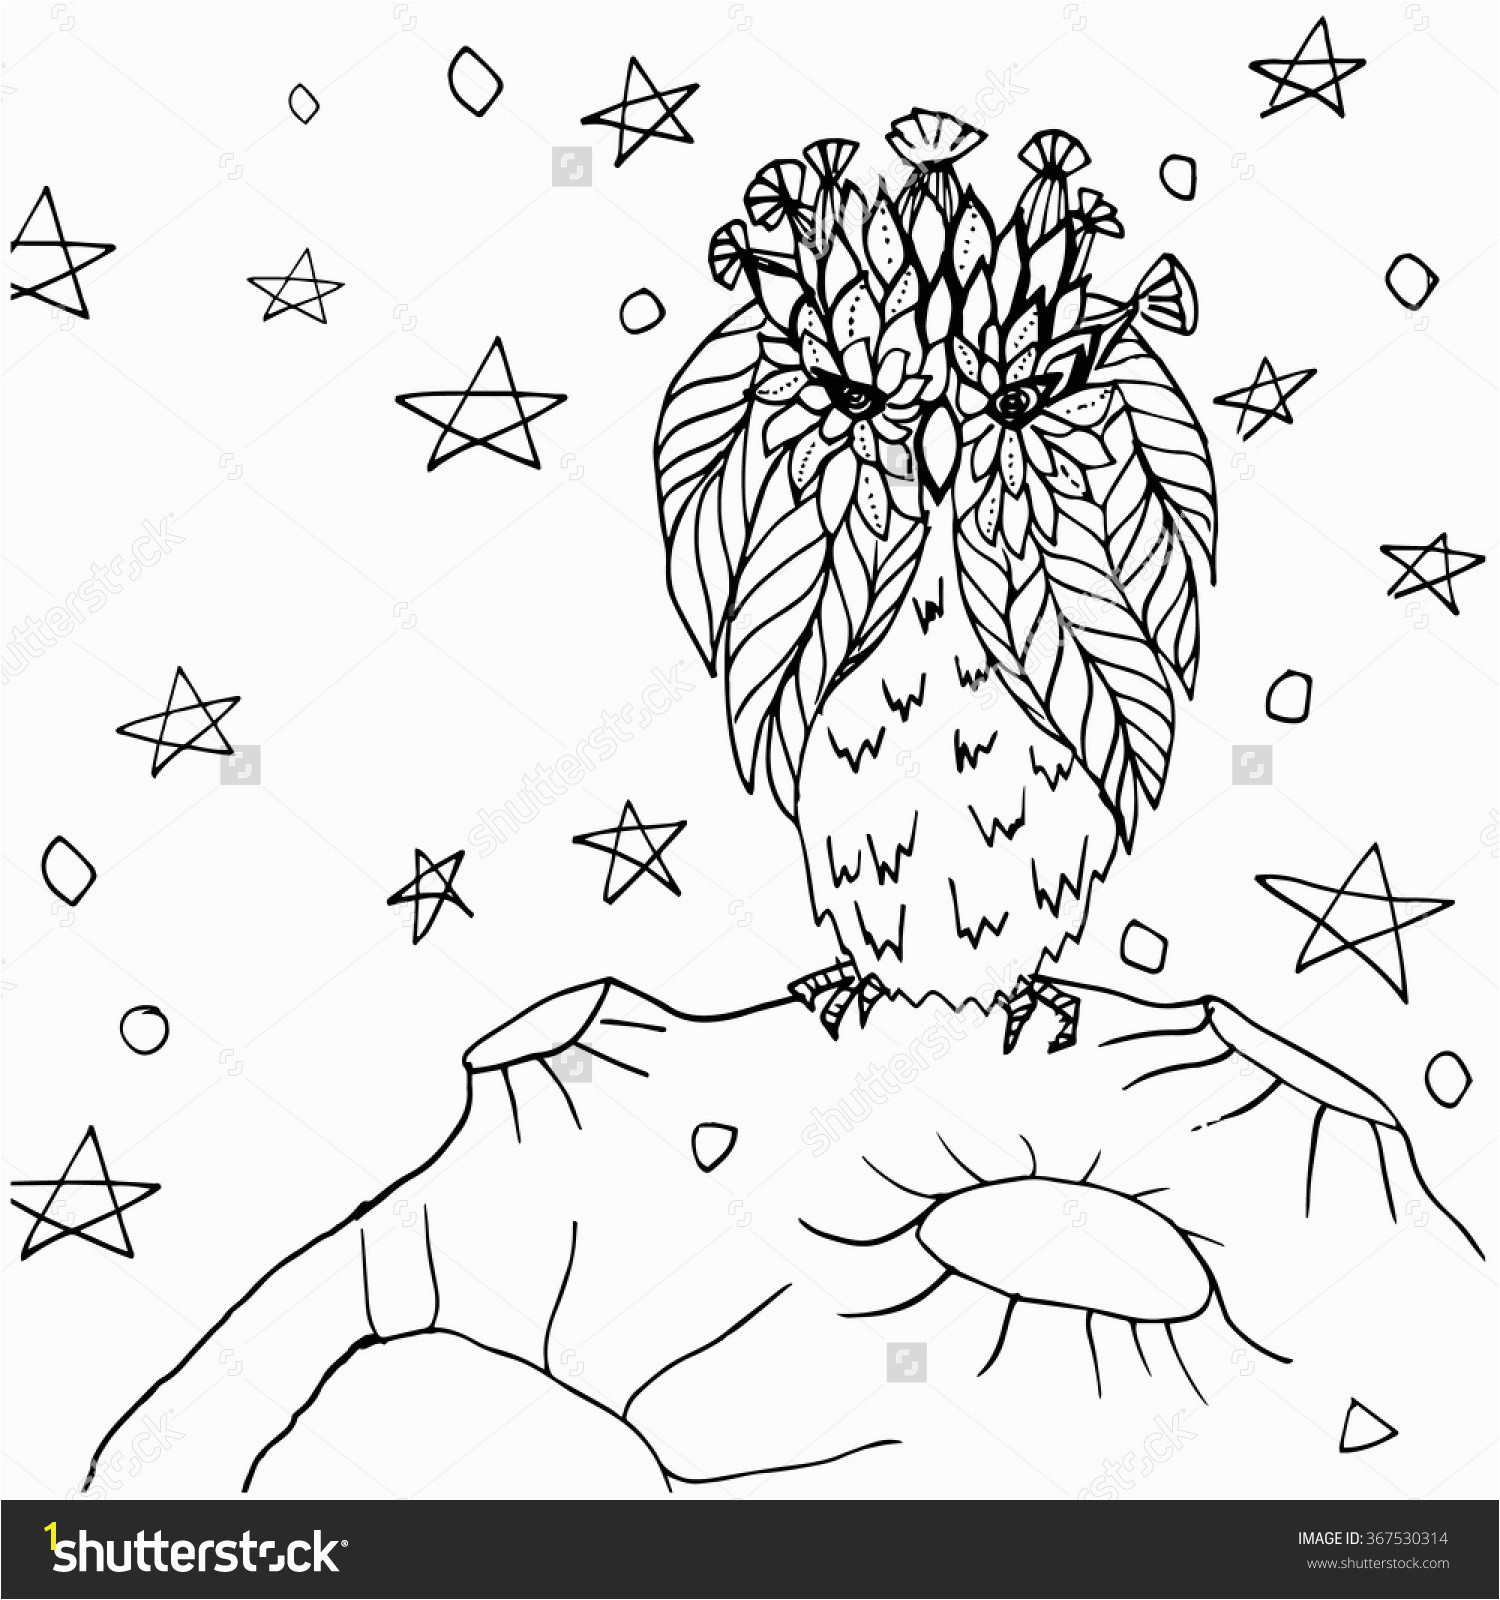 Stars In the Sky Coloring Pages Starry Sky Coloring Download Starry Sky Coloring